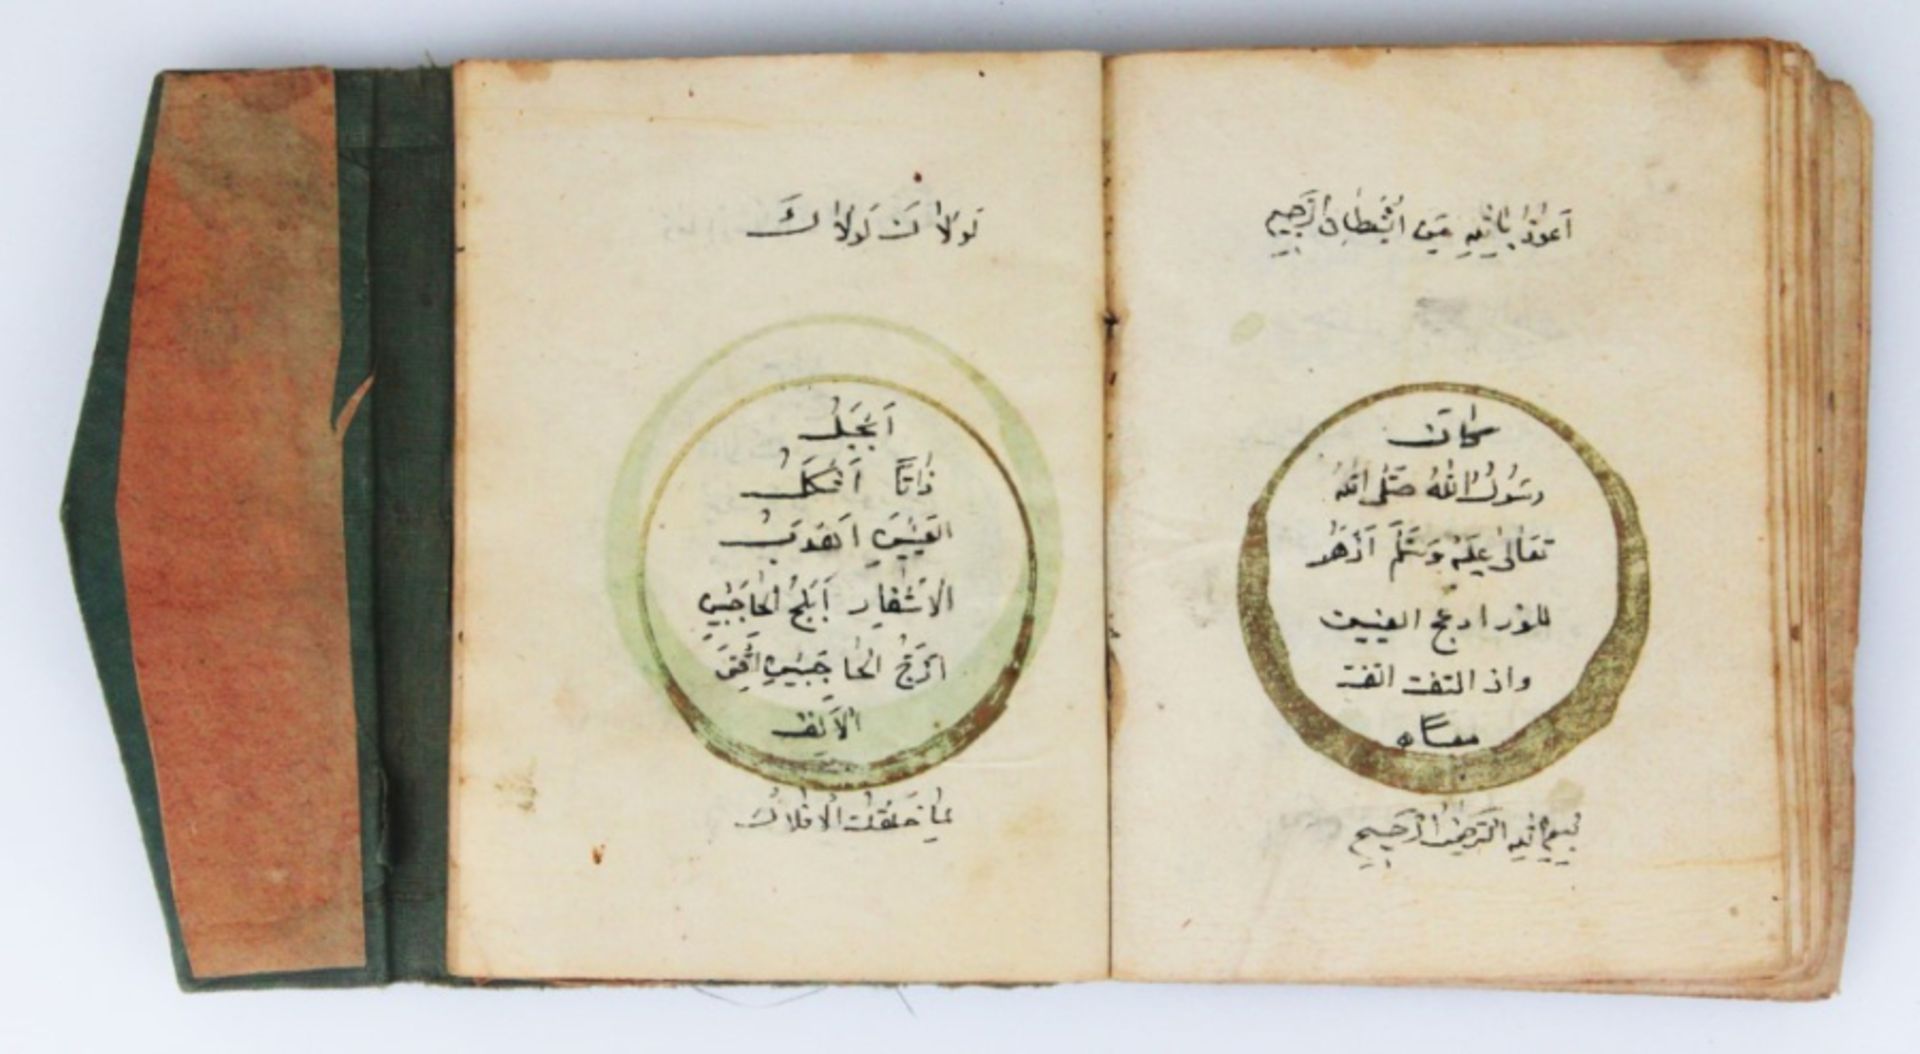 A 18th century Ottoman book with suras and prayers - Image 2 of 12